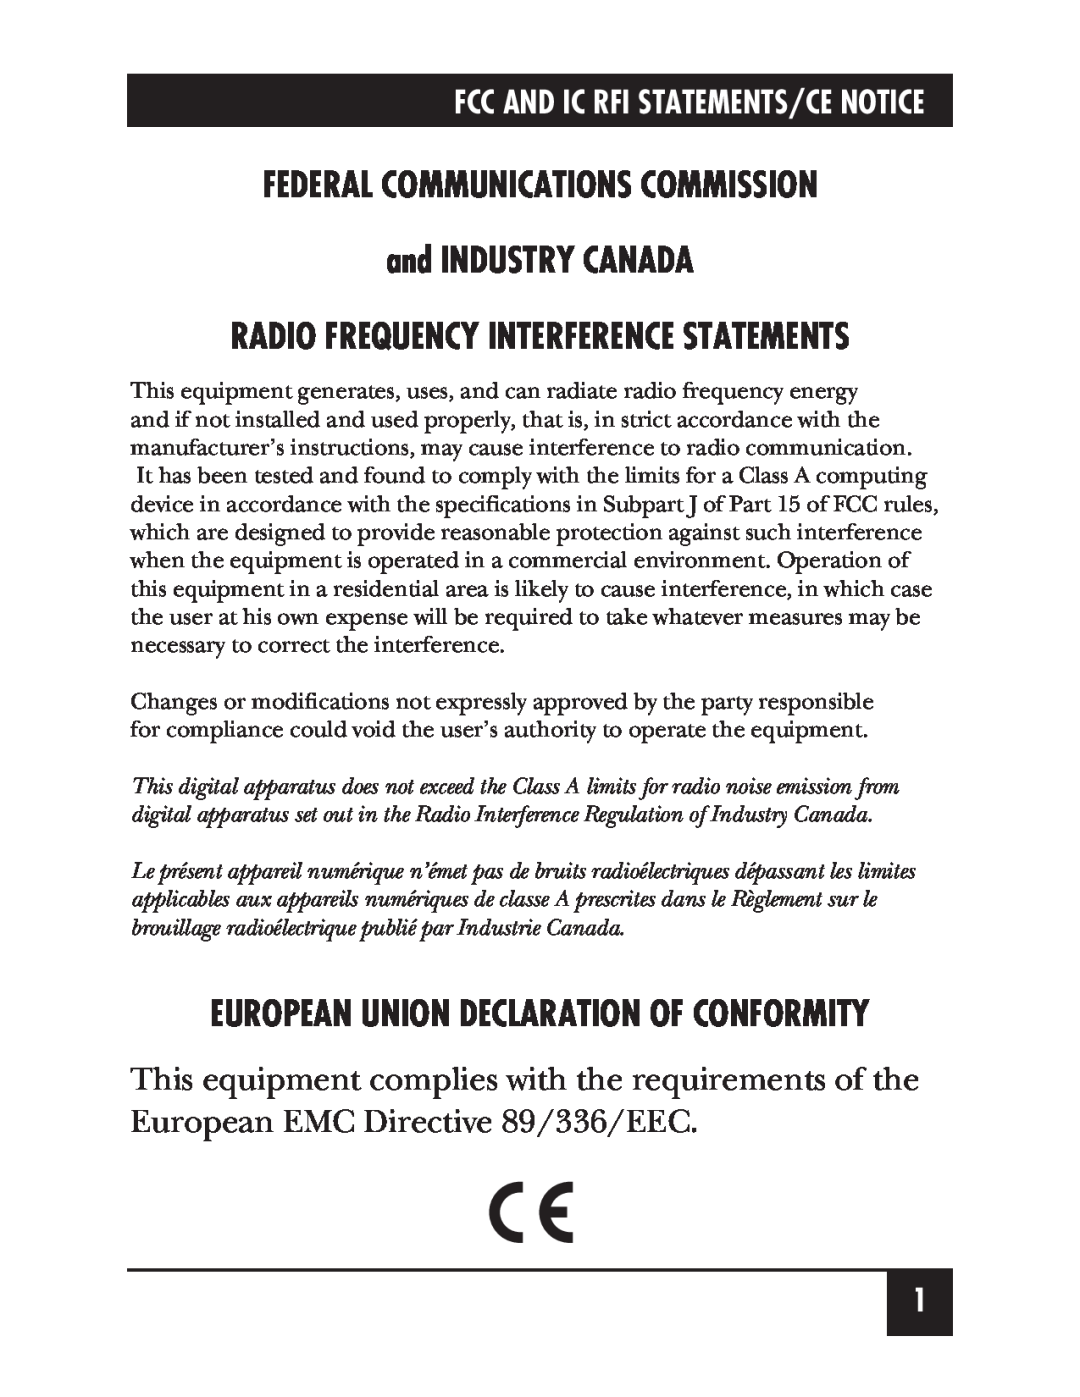 Black Box IC266A manual FEDERAL COMMUNICATIONS COMMISSION and INDUSTRY CANADA, Radio Frequency Interference Statements 